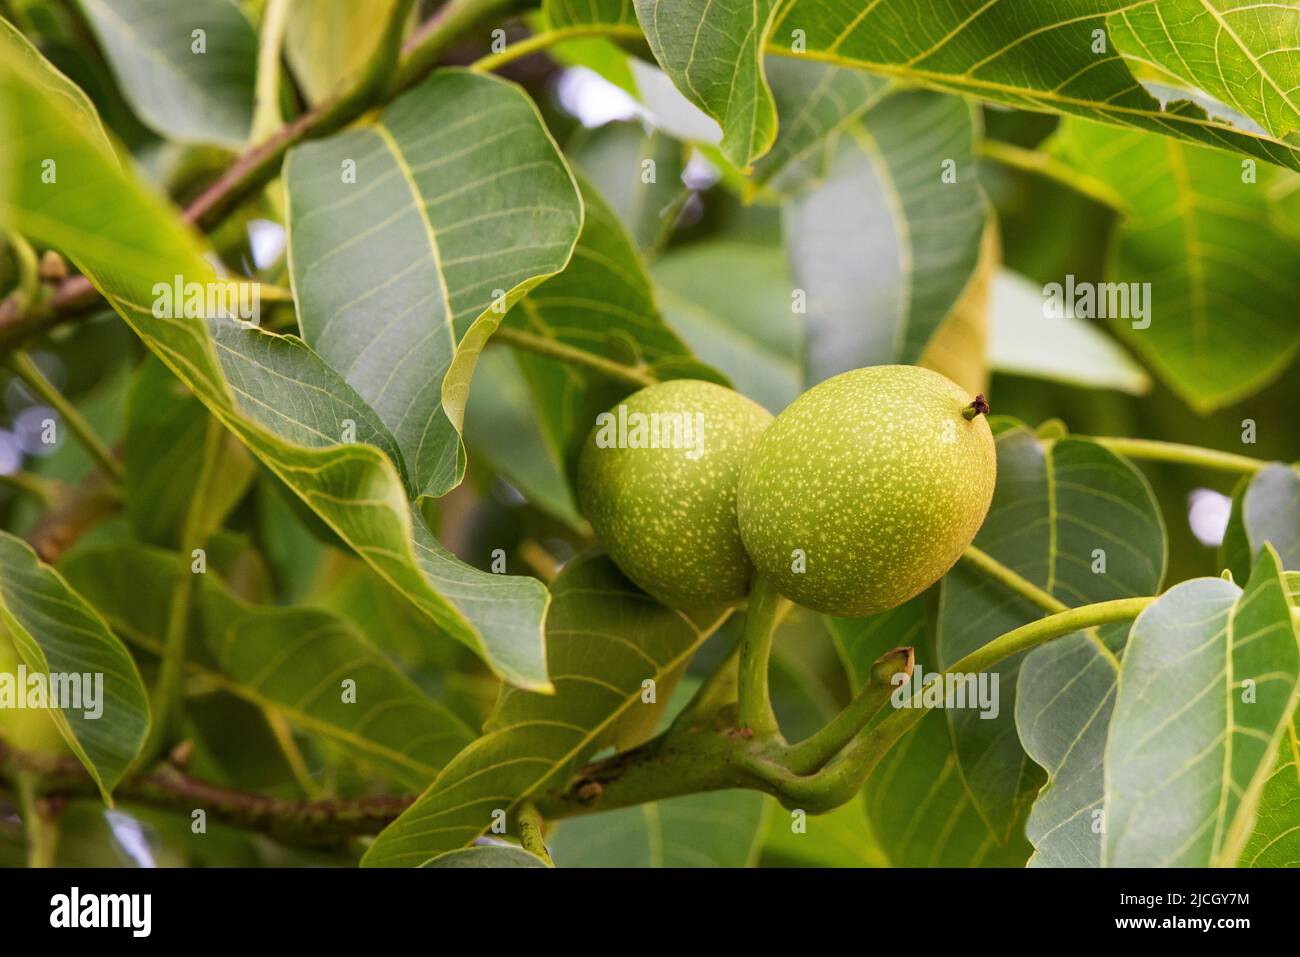 Walnut branch whit fruits on a tree Stock Photo